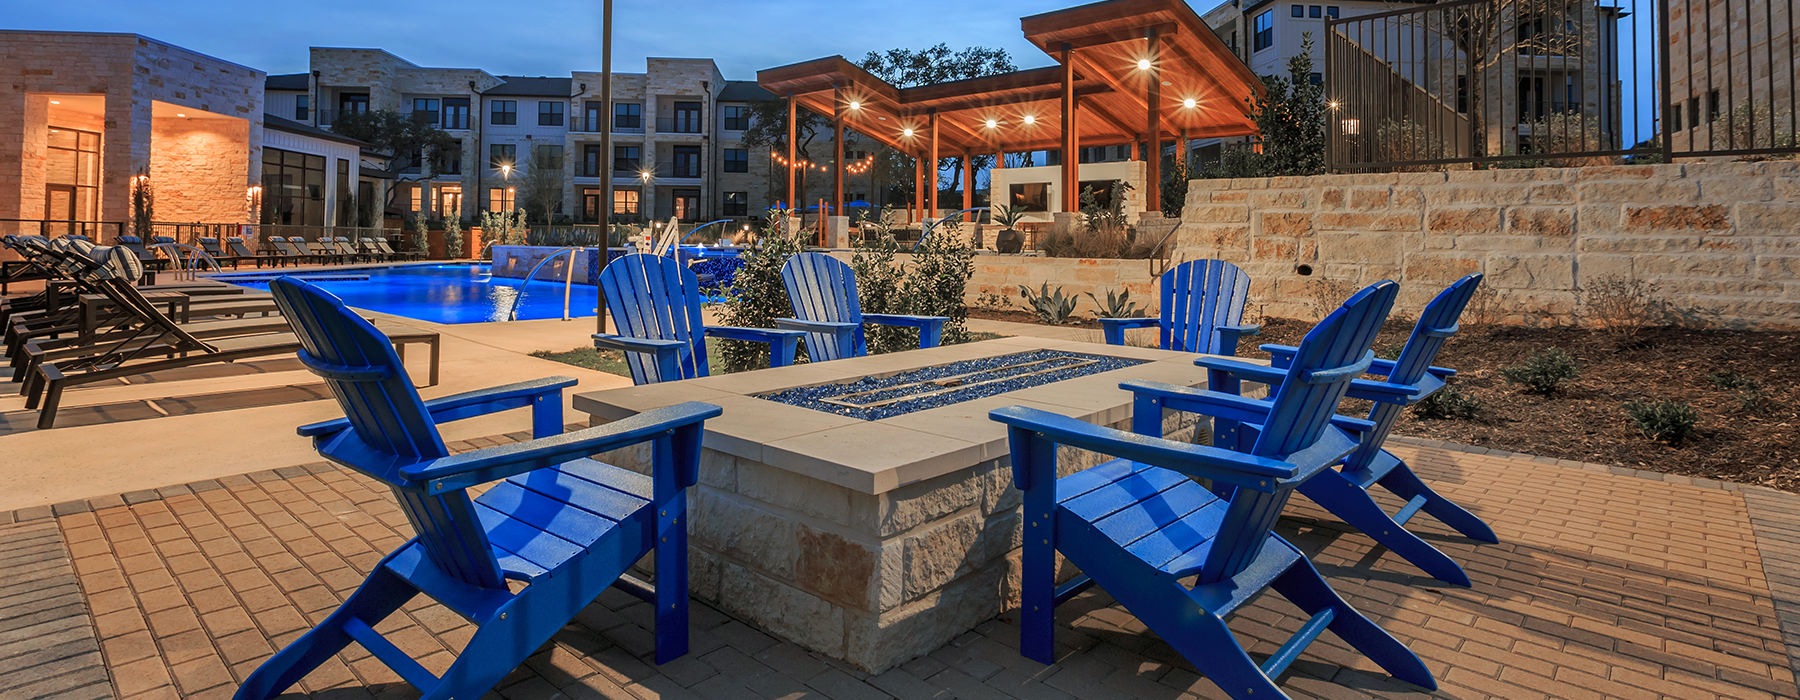 Firepits near the sparkling pool with ample seating